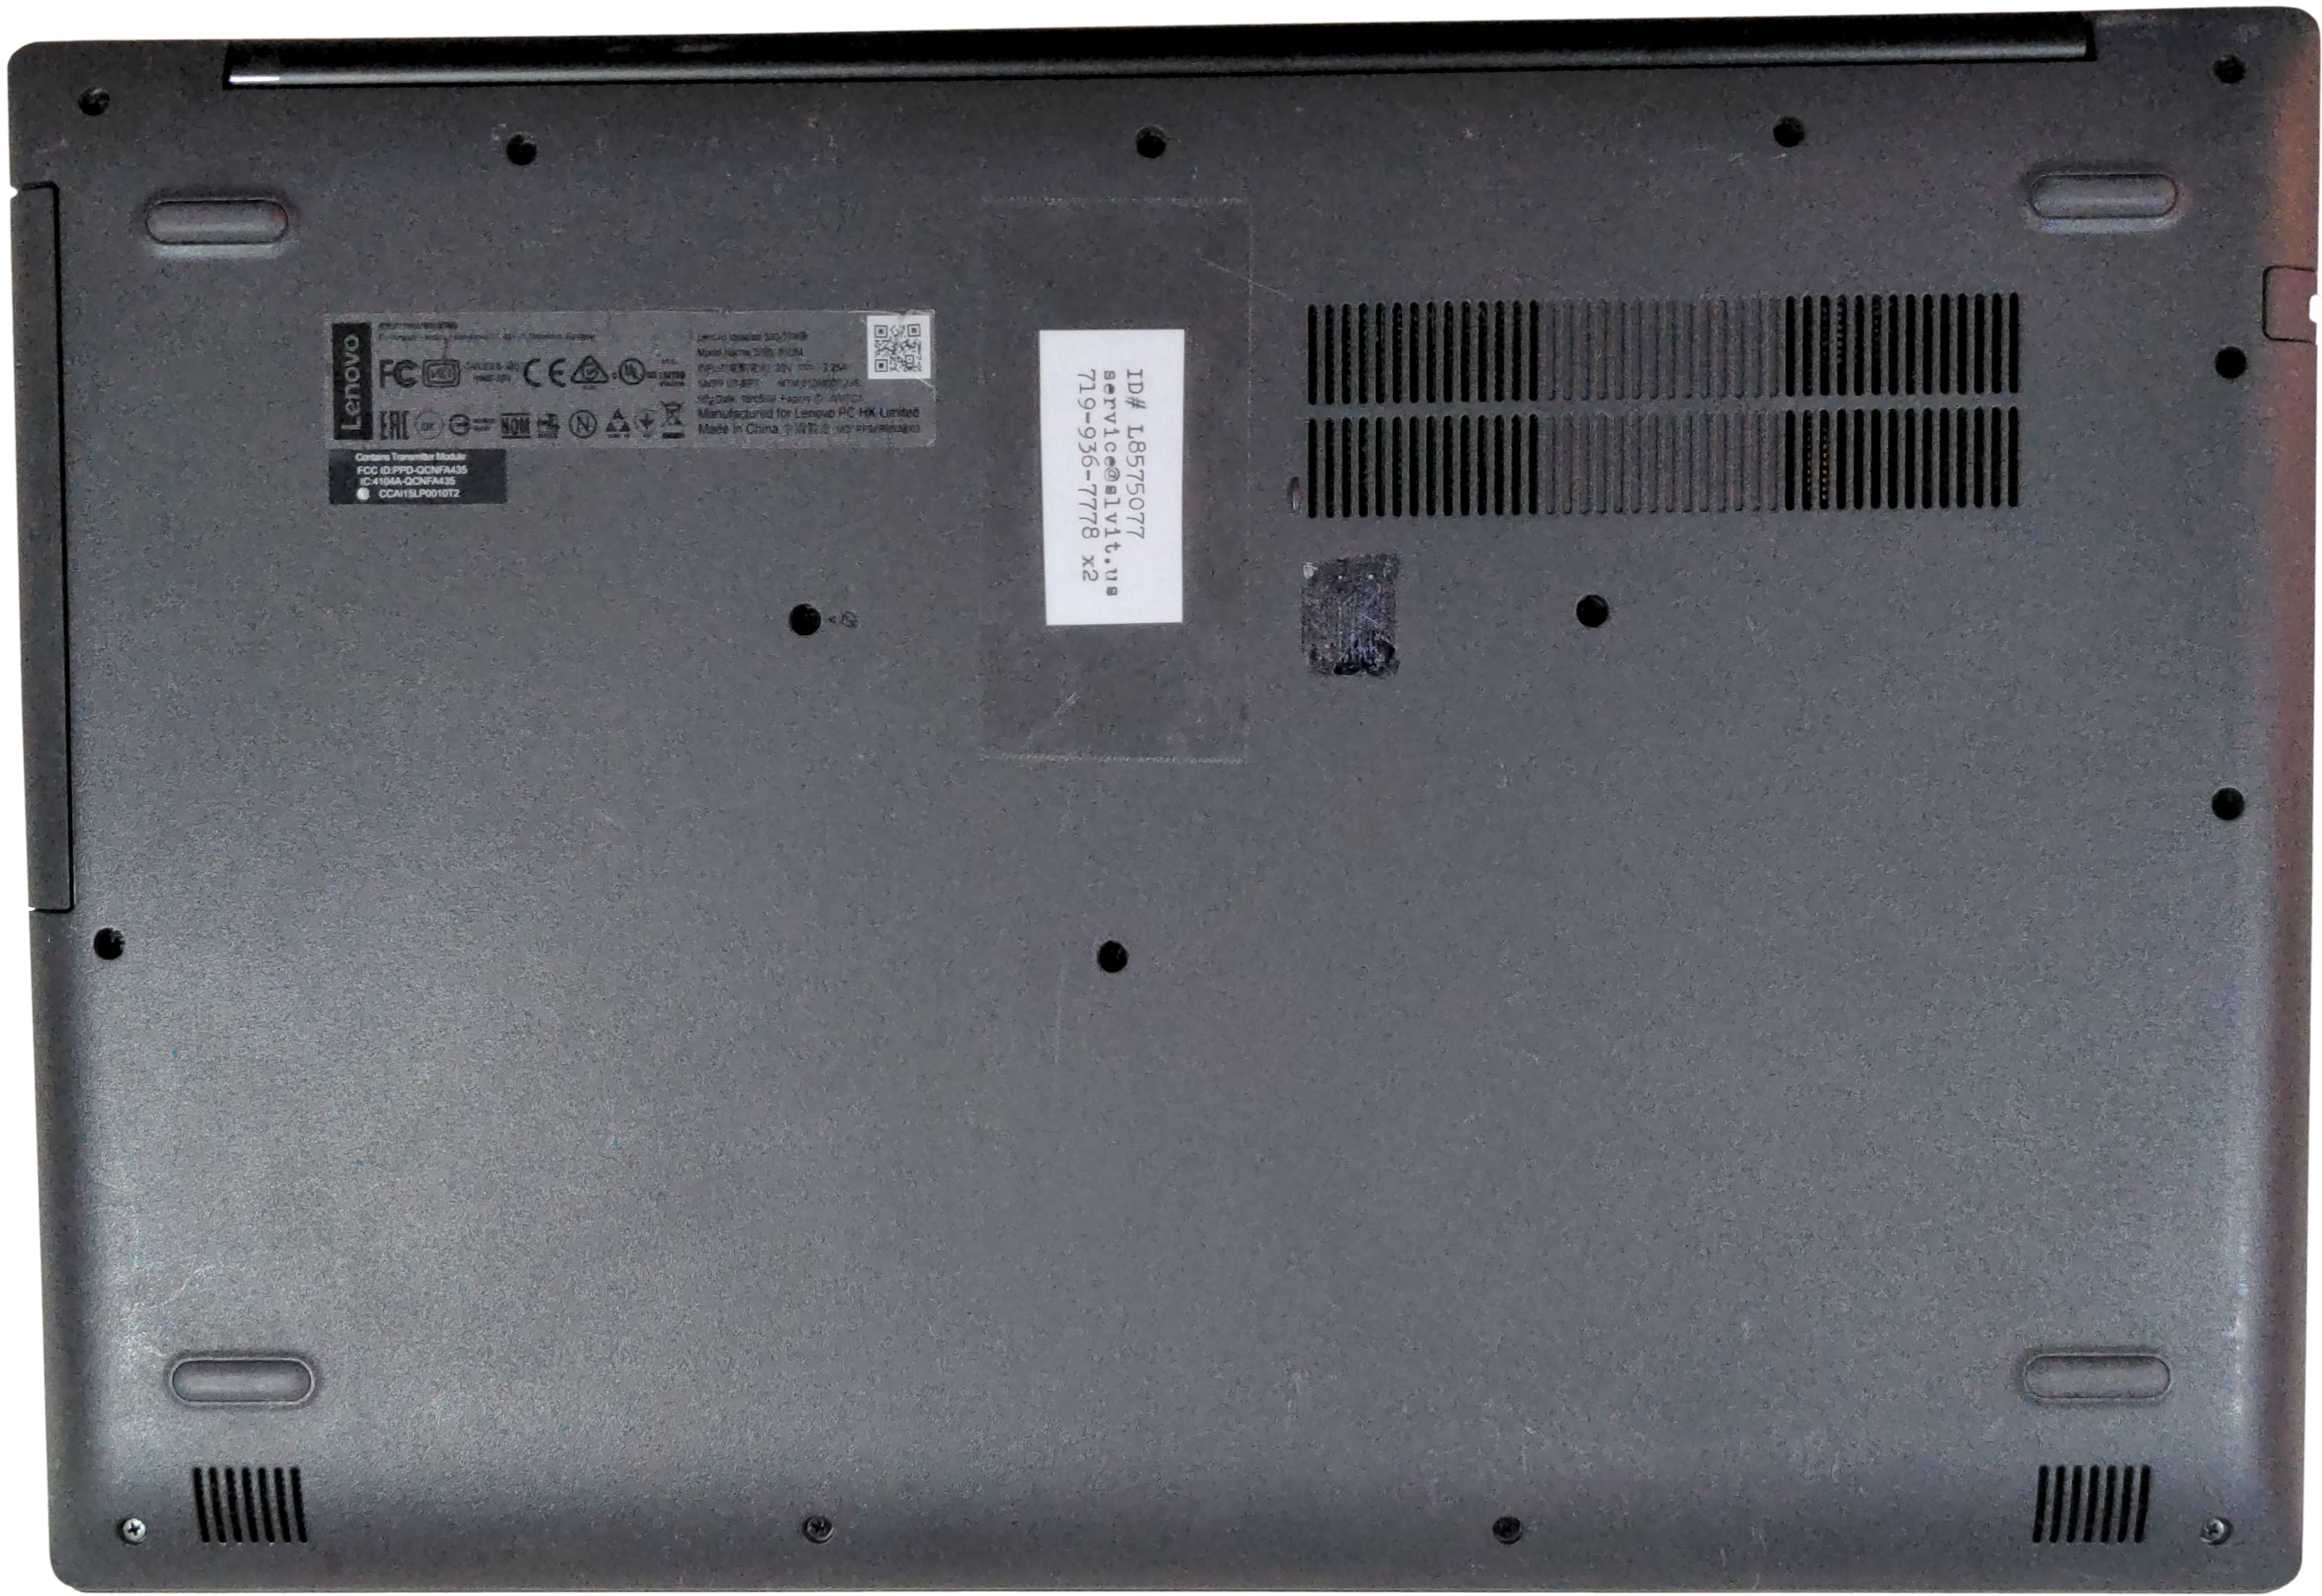 A view of the bottom of this Lenovo Ideapad